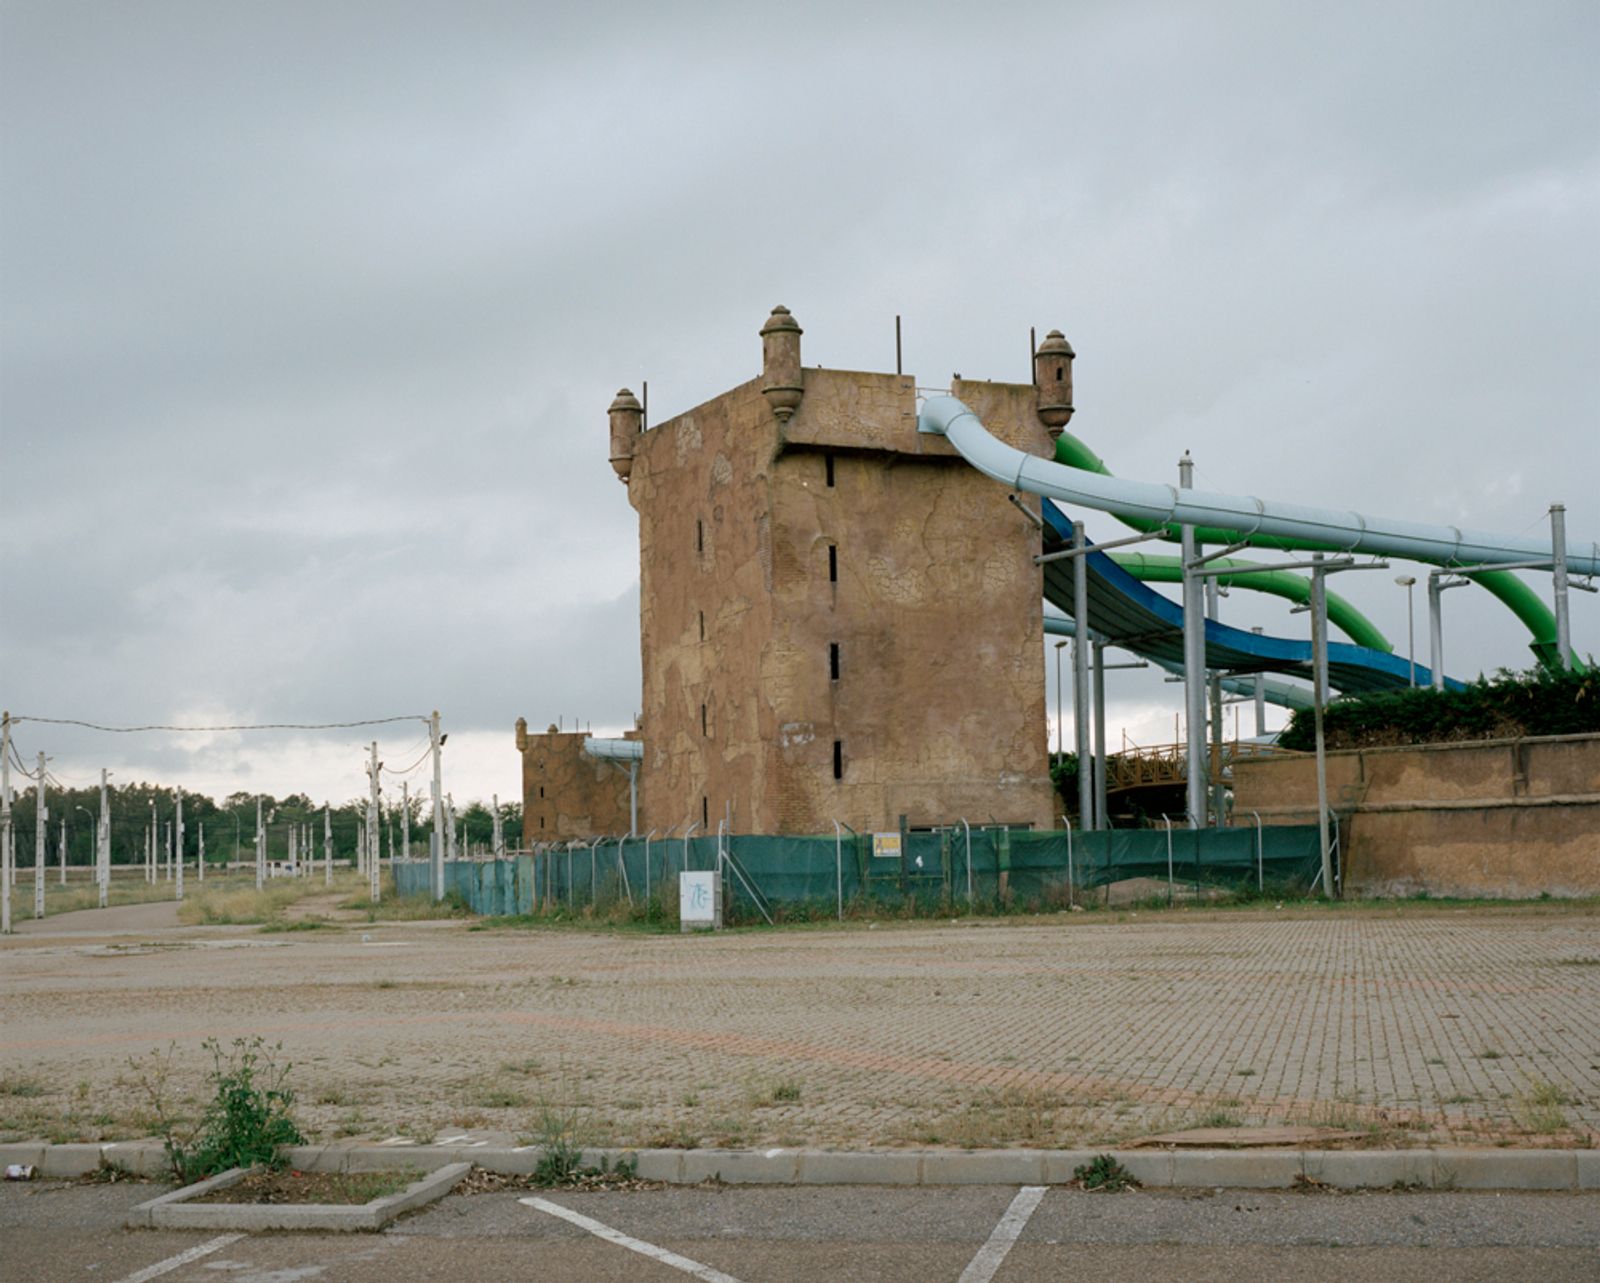 © Tommaso Rada - Spain, Badajoz. A water park built with the shape of a middle age castle.